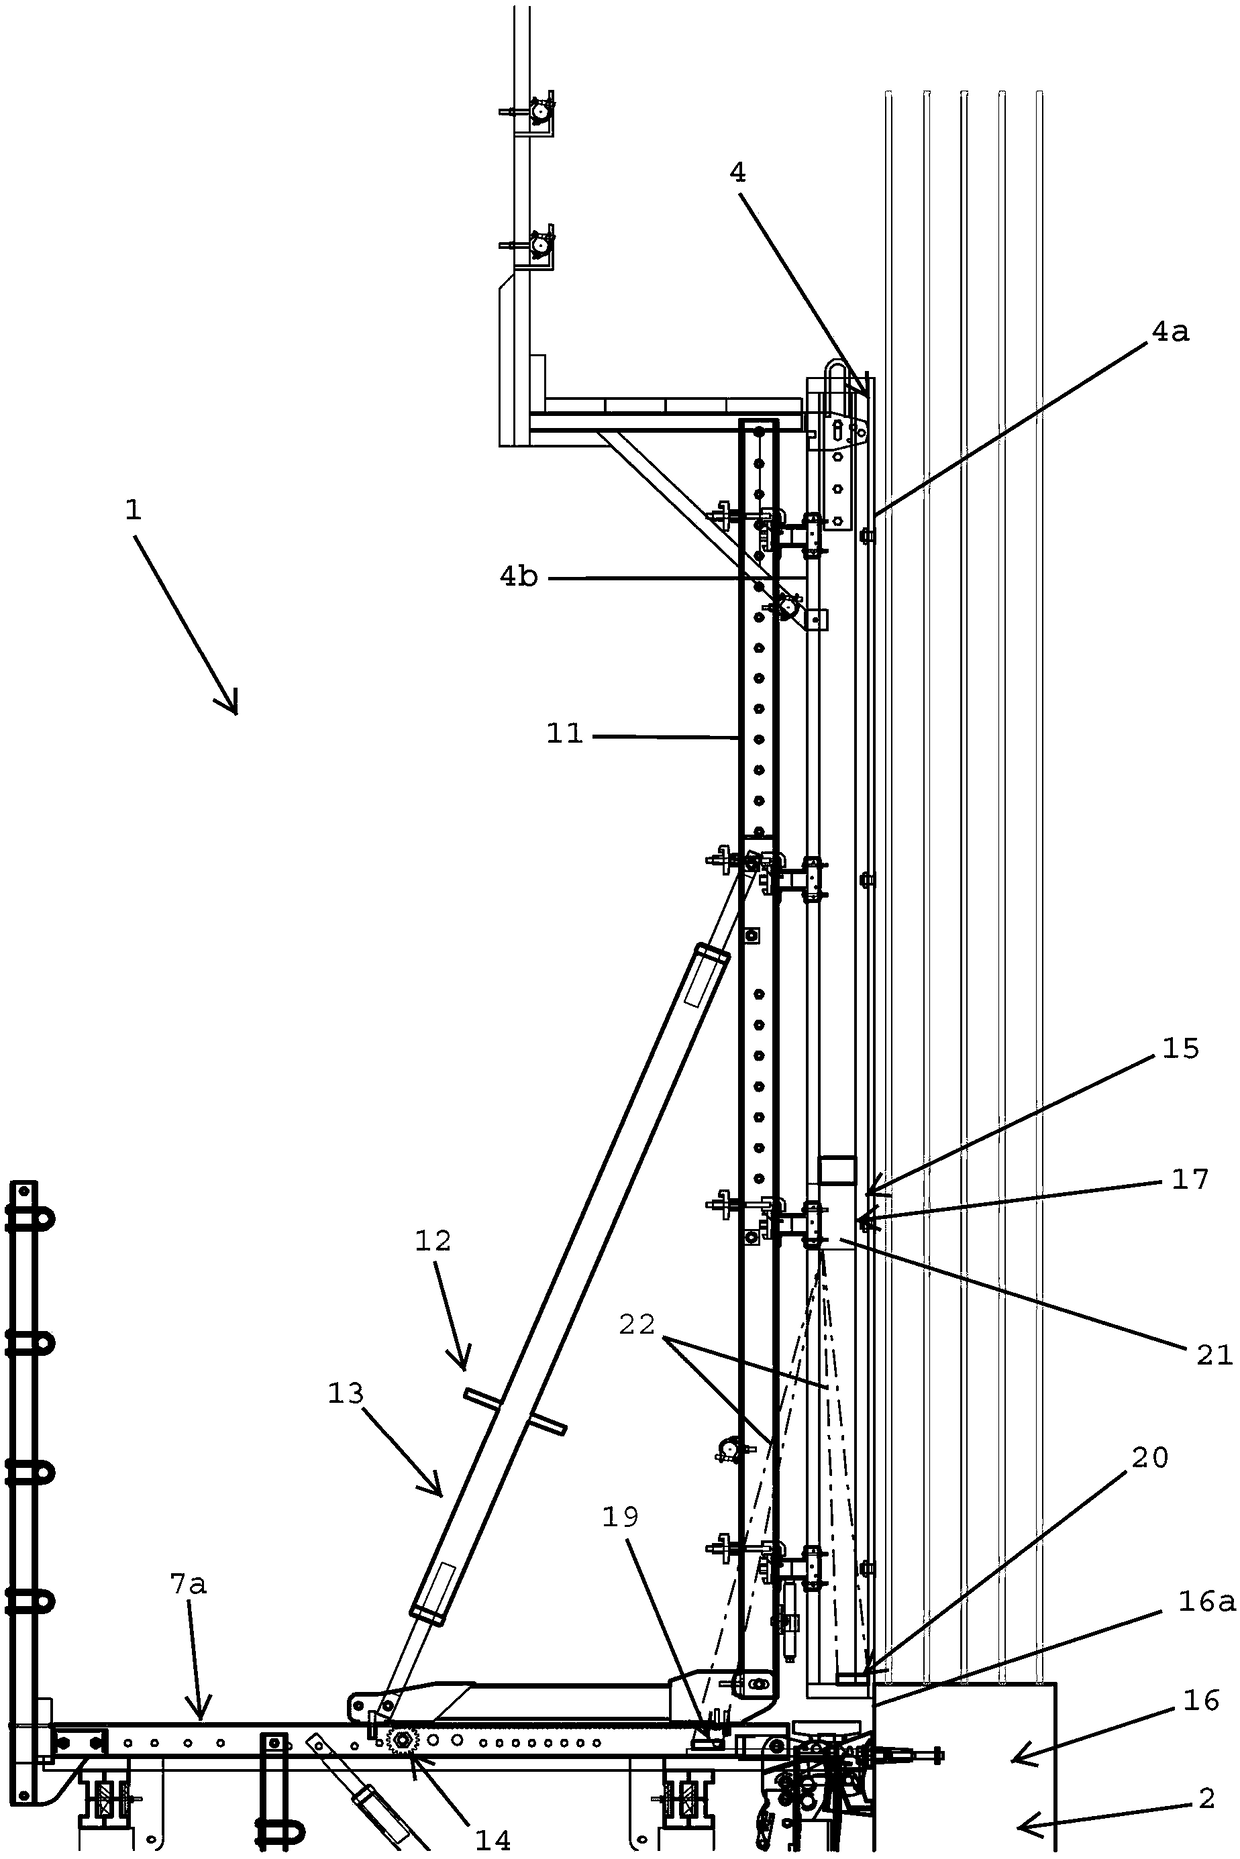 Climbing formwork and method for erection of a concrete structure